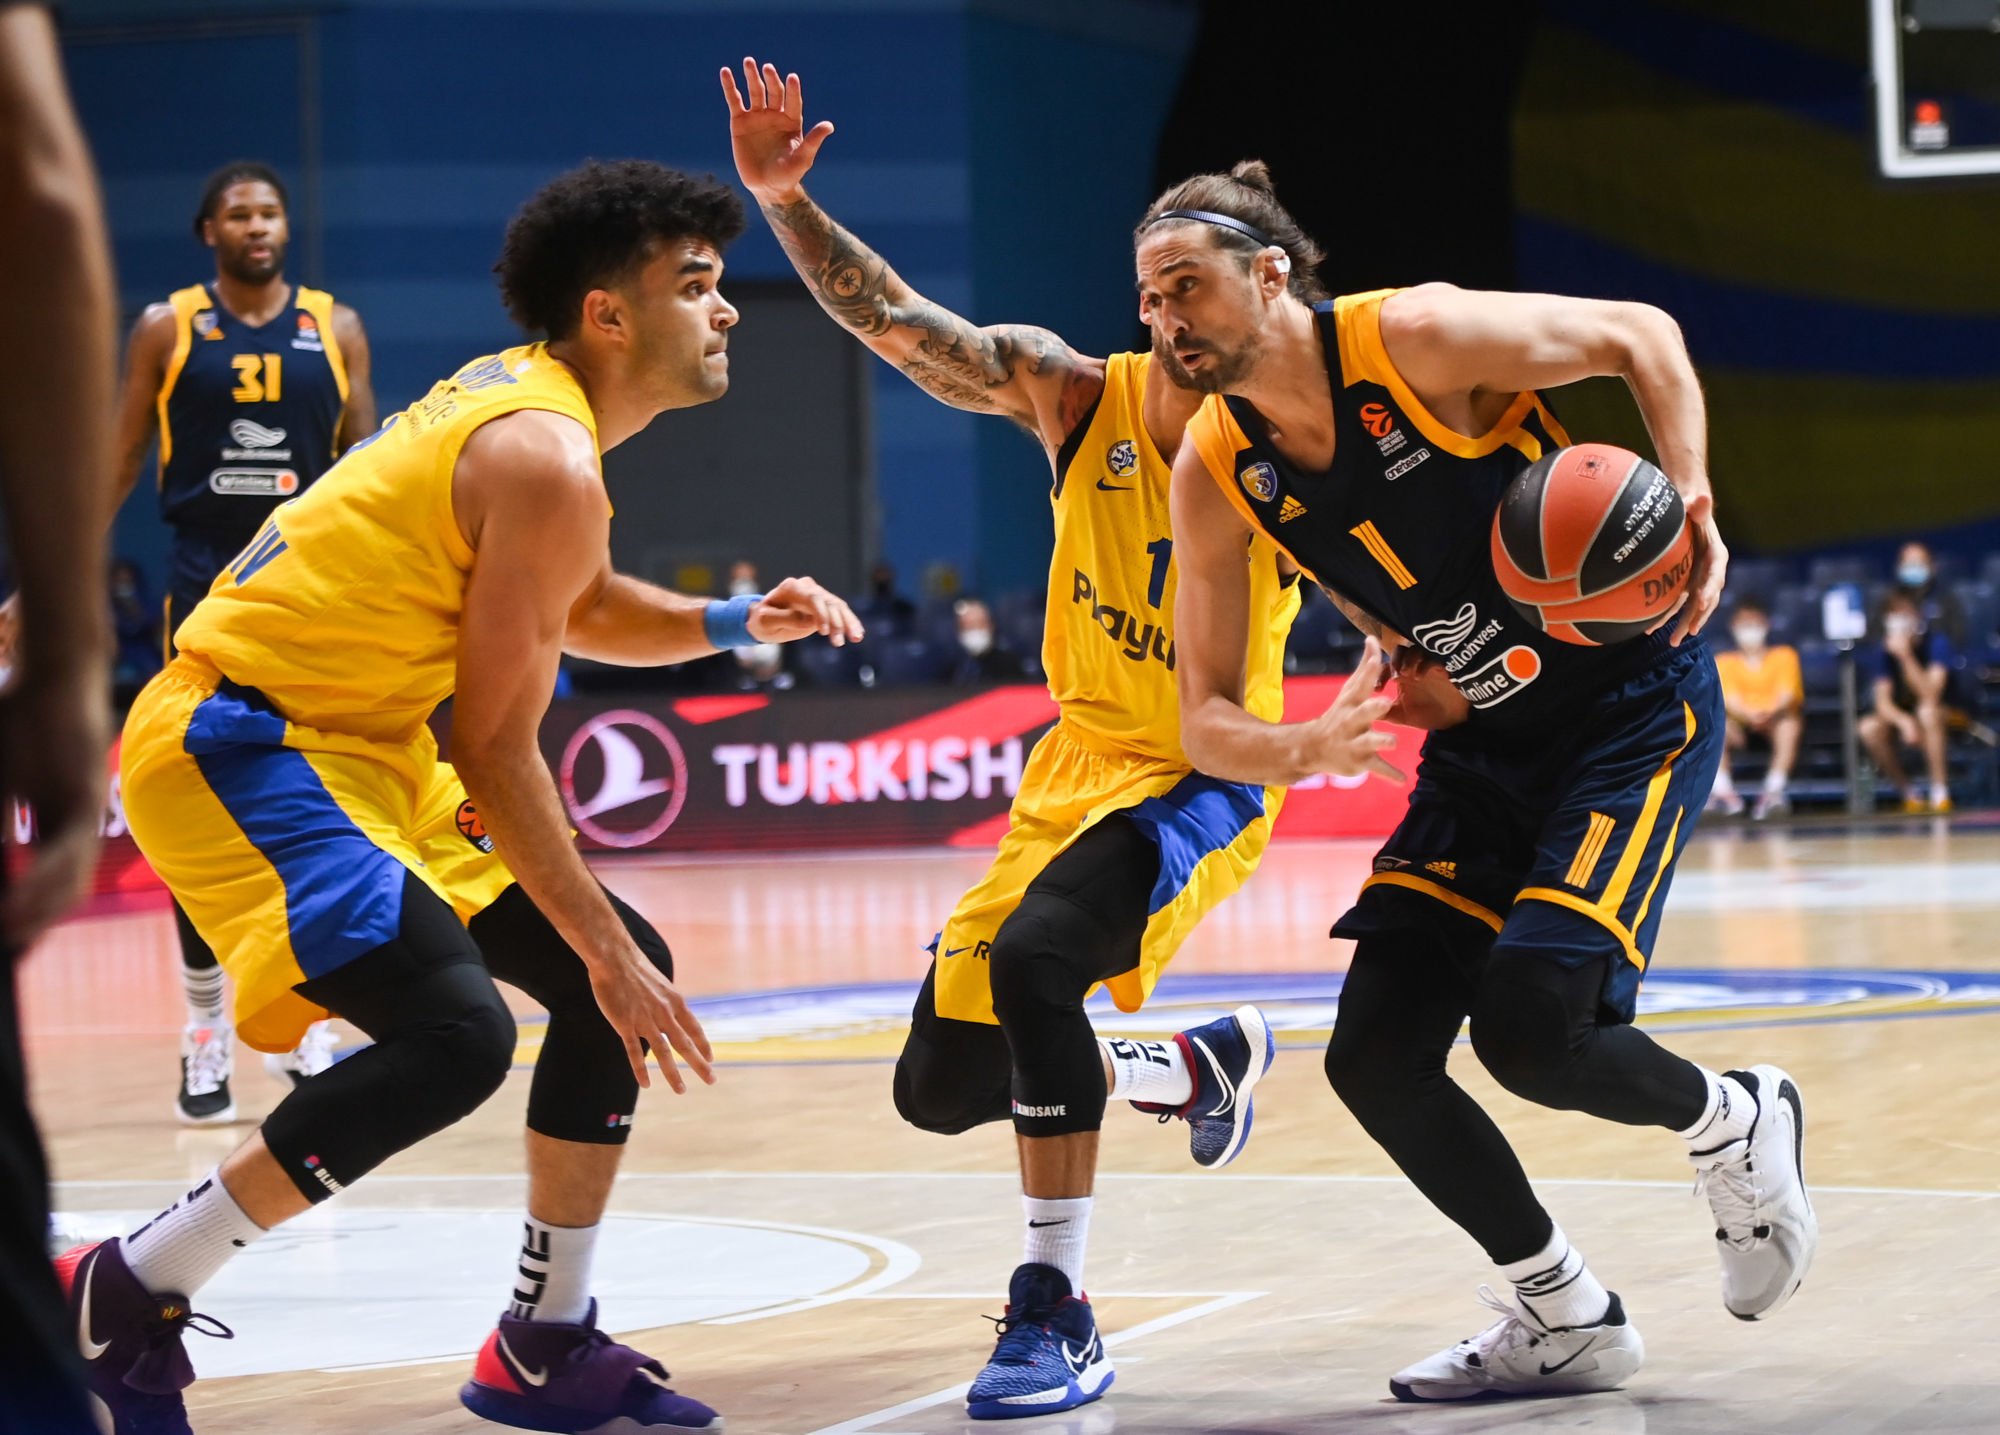 6366209 23.10.2020 From right, Khimki's Alexey Shved, Maccabi's Scottie Wilbekin and Elijah Bryant struggle for a ball during the Euroleague basketball match between Khimki and Maccabi Tel Aviv, in Mytishchi, outside Moscow, Russia. Grigory Sysoev / Sputnik 
By Icon Sport - Moscou (Russie)